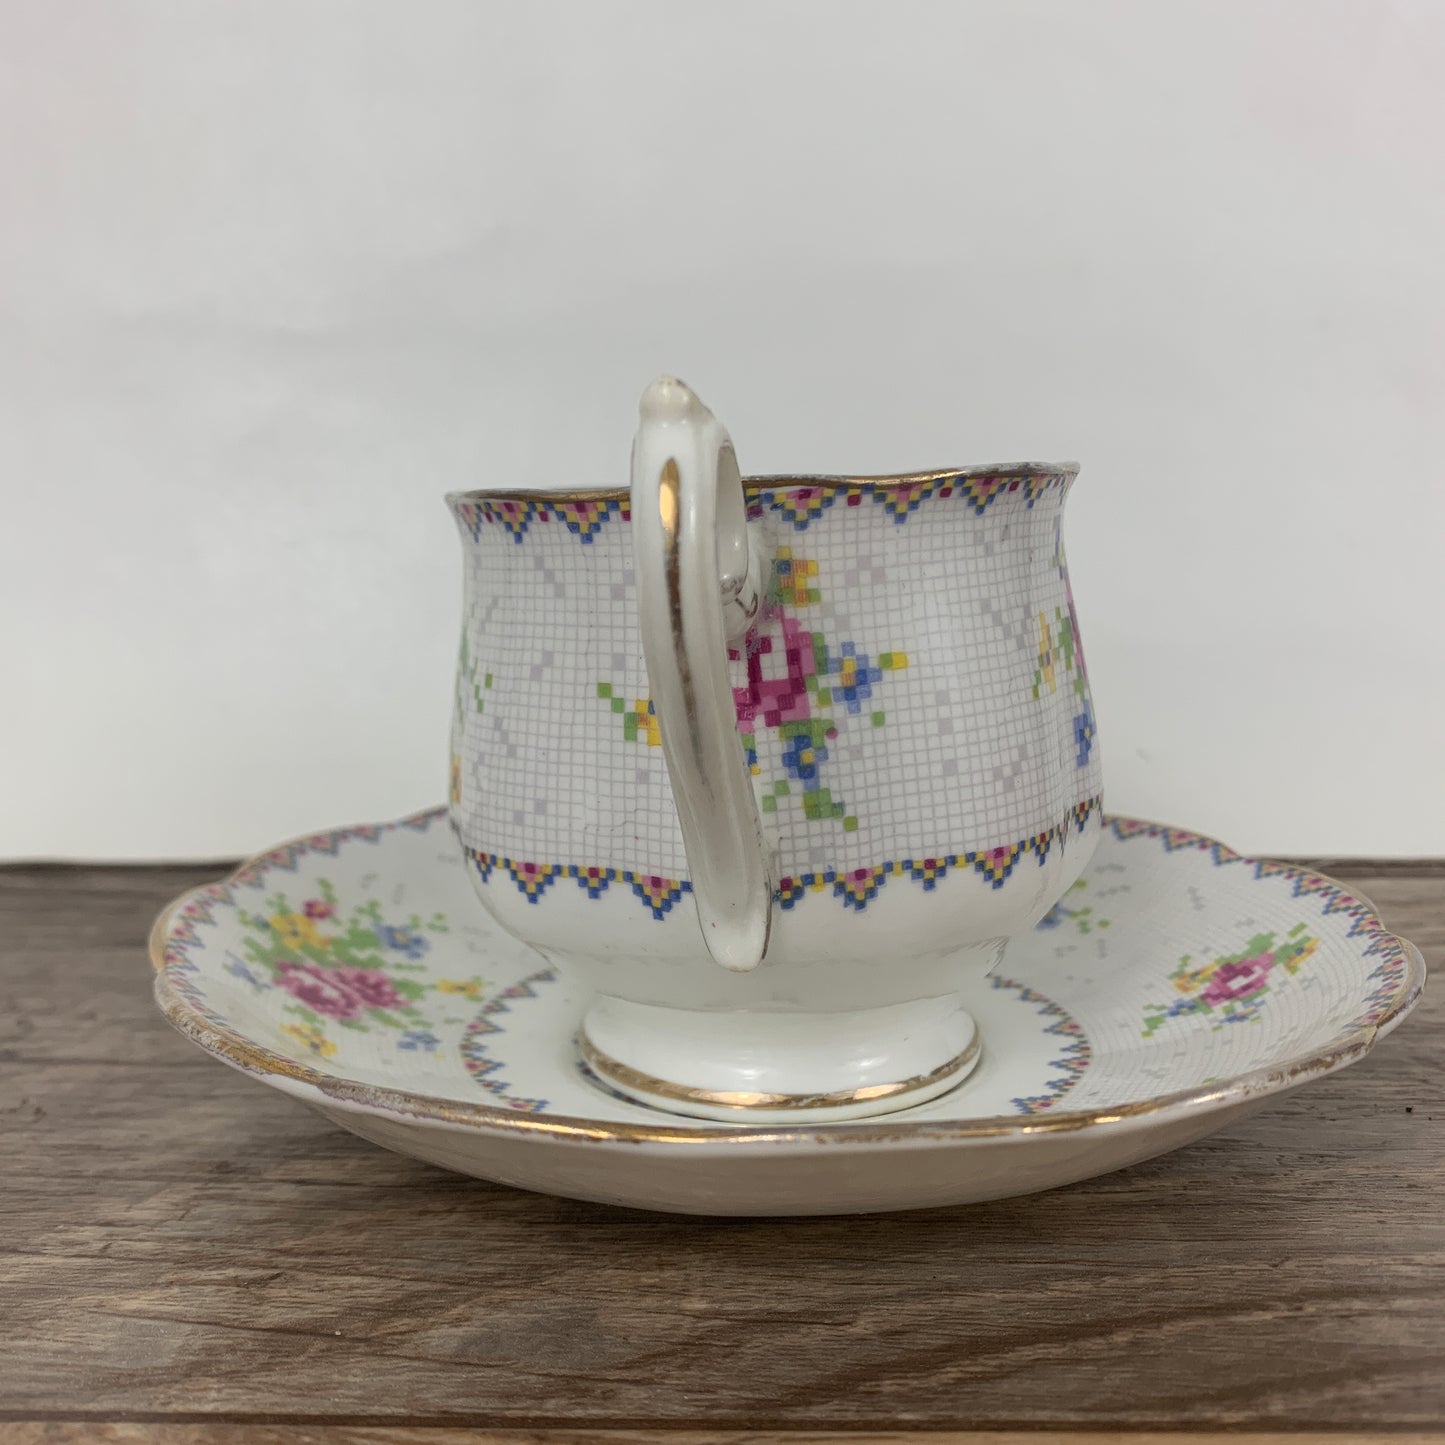 Royal Albert Petit Point Vintage Teacup and Saucer Made in England - Free Shipping